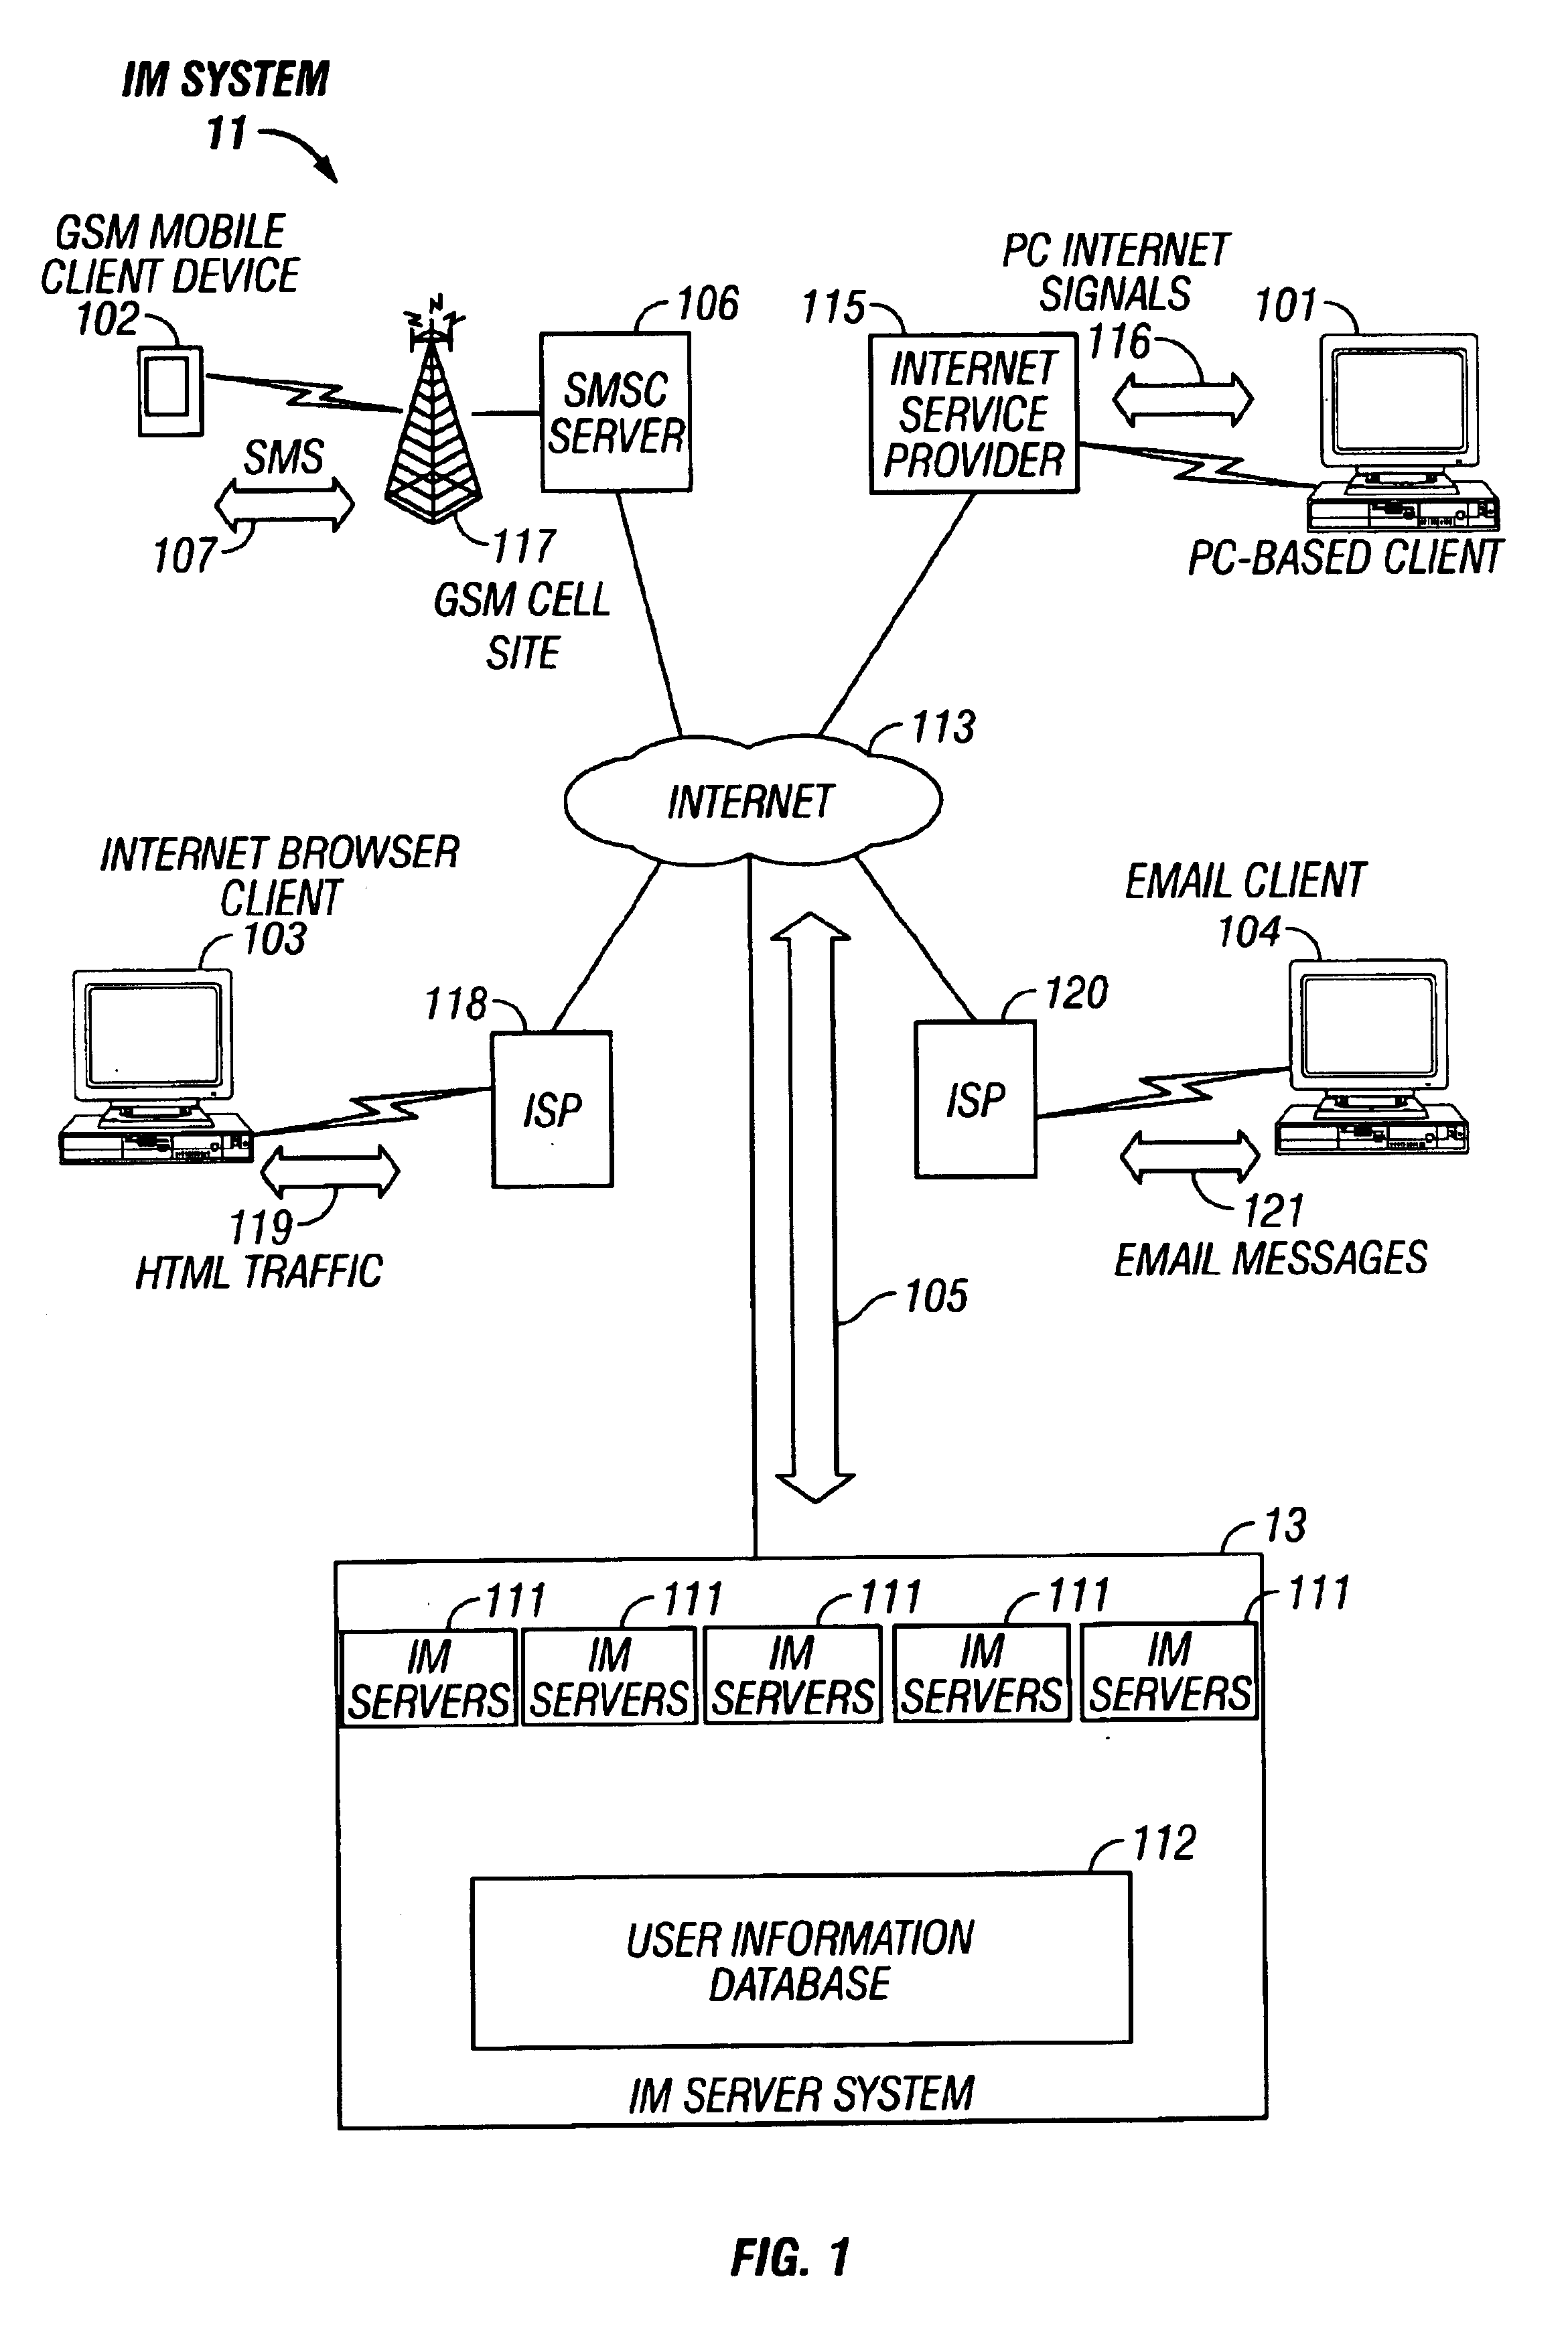 Method and system for tracking the online status of active users of an internet-based instant messaging system